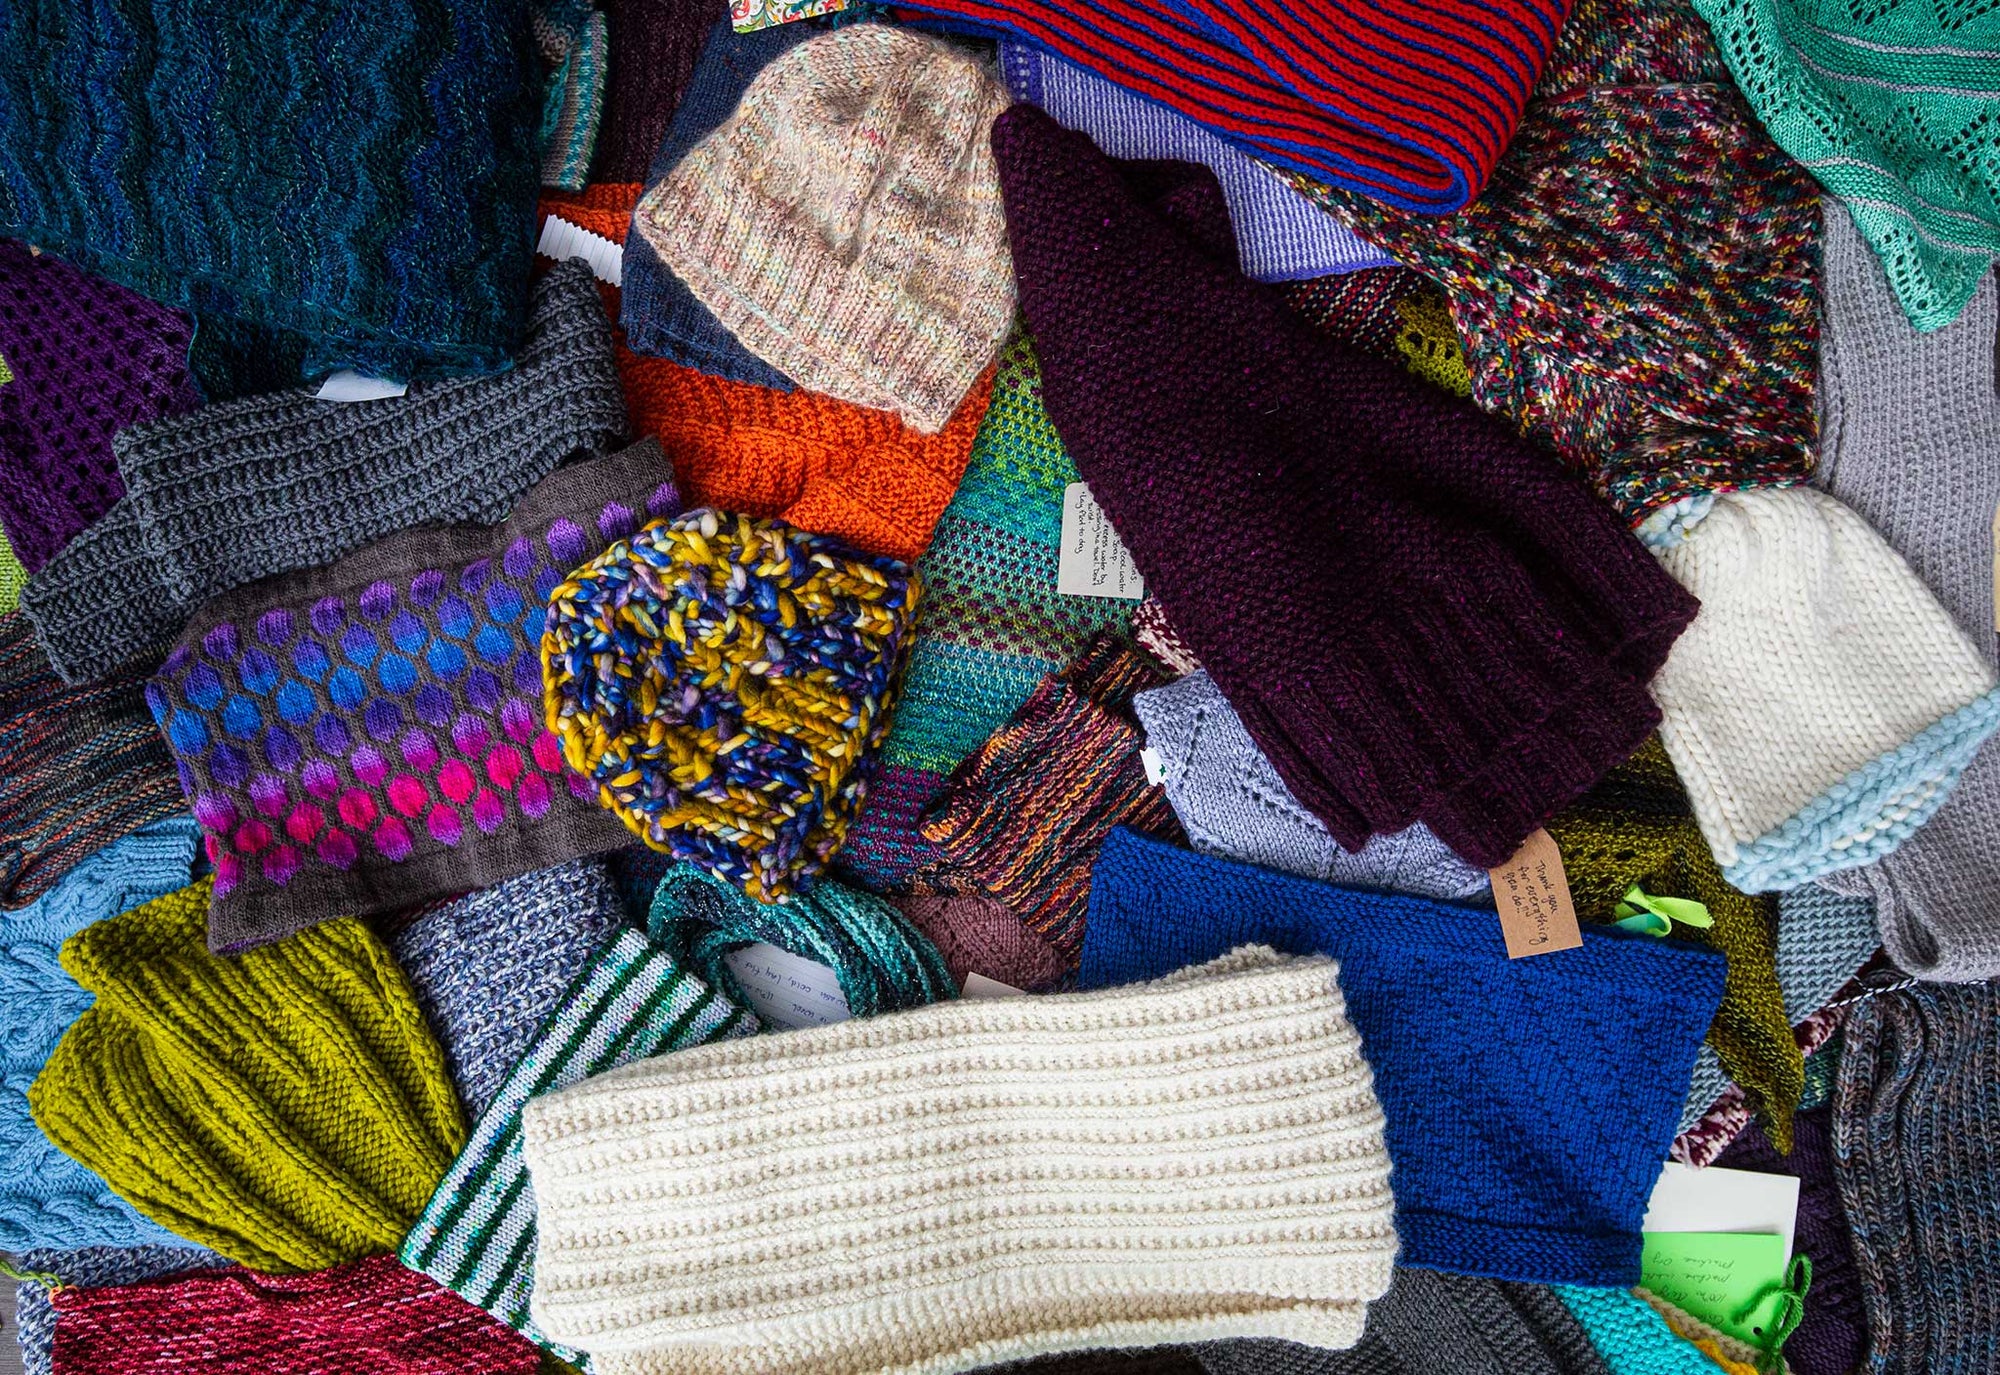 All of the various shawls, hats, scarves and cowls crafted for us in 2021 by the TOM BIHN Ravelry group.